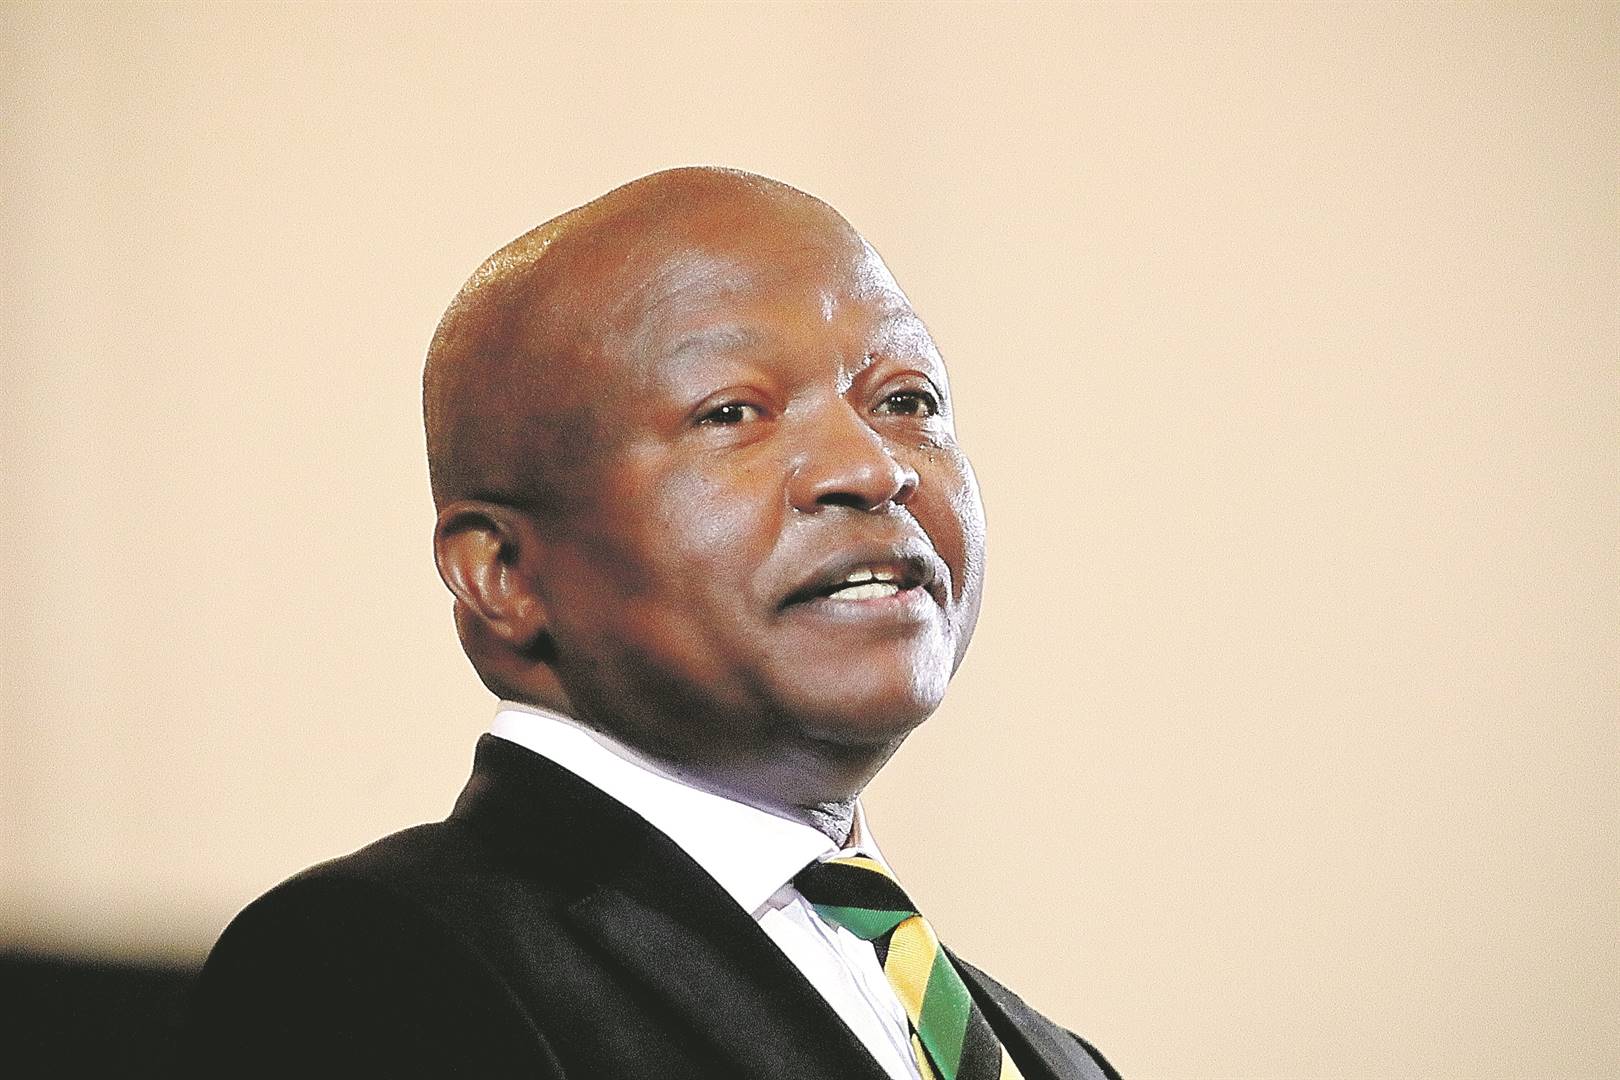 The media has widely reported that deputy president David Mabuza has resigned. Photo by Gallo Images/Fani Mahuntsi